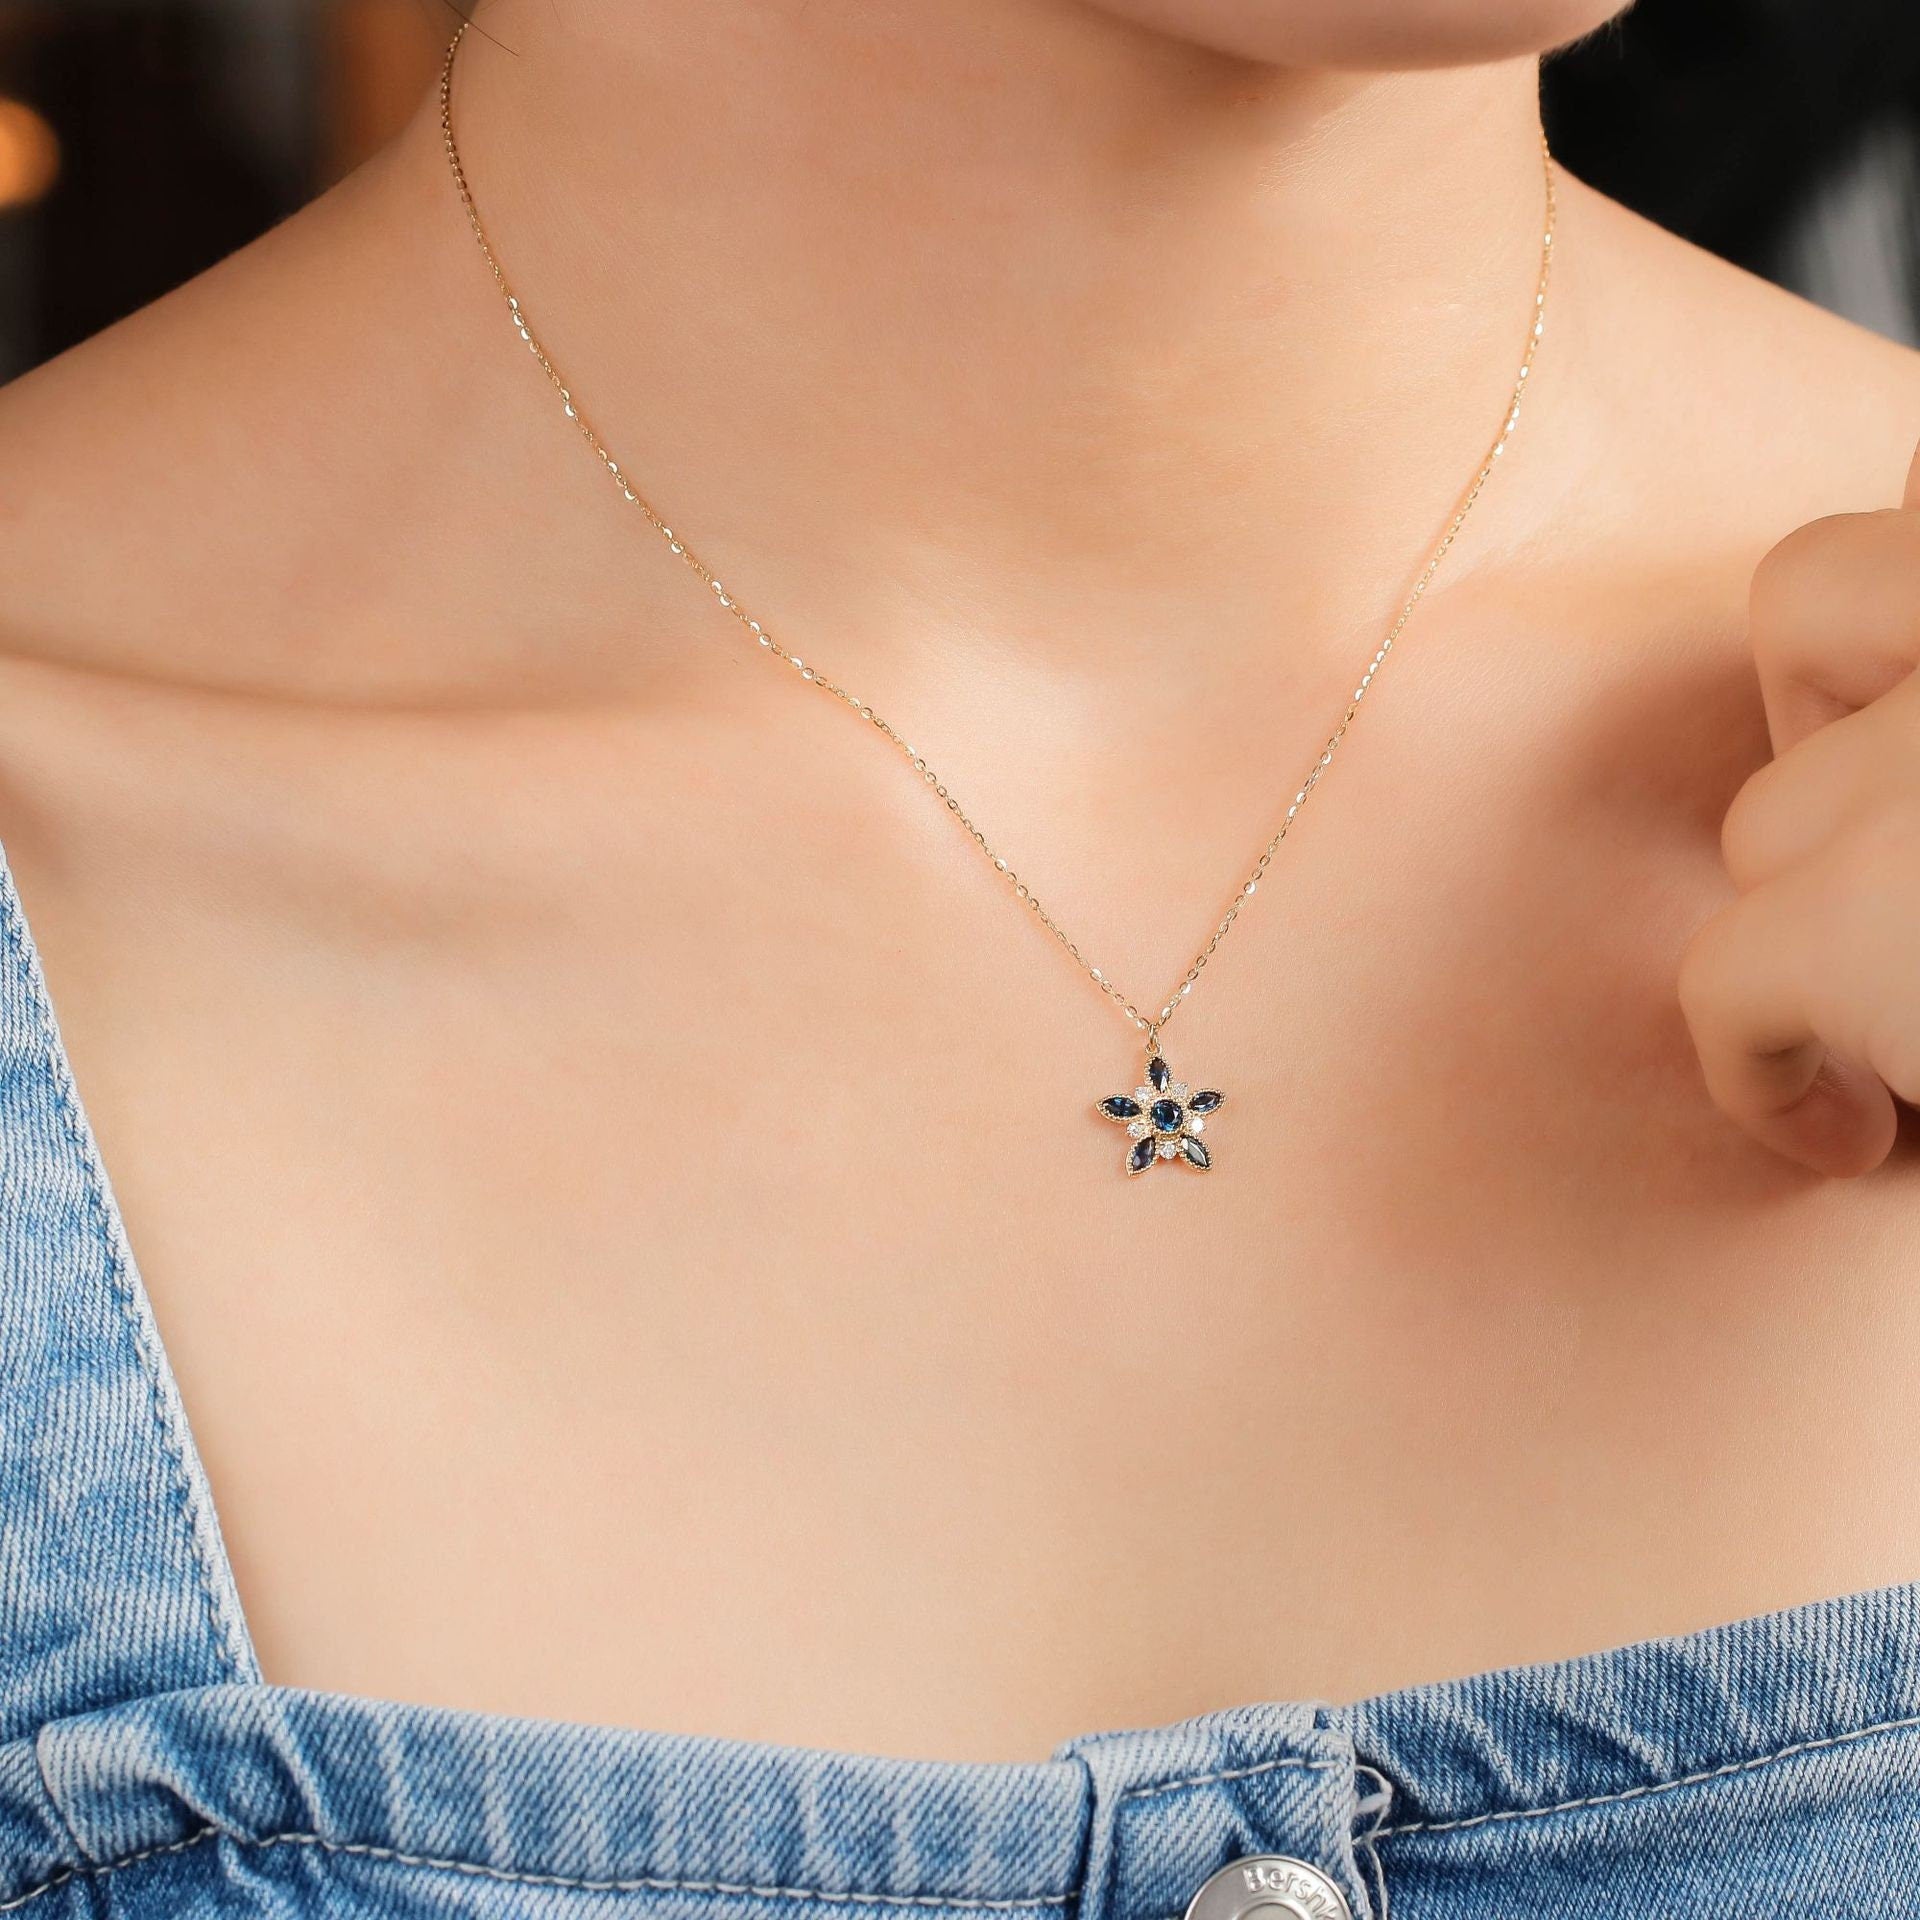 18K yellow gold teal sapphire pendant necklace vintage blue sapphire diamond pendant necklace floral necklace engagement gift for women - PENFINE